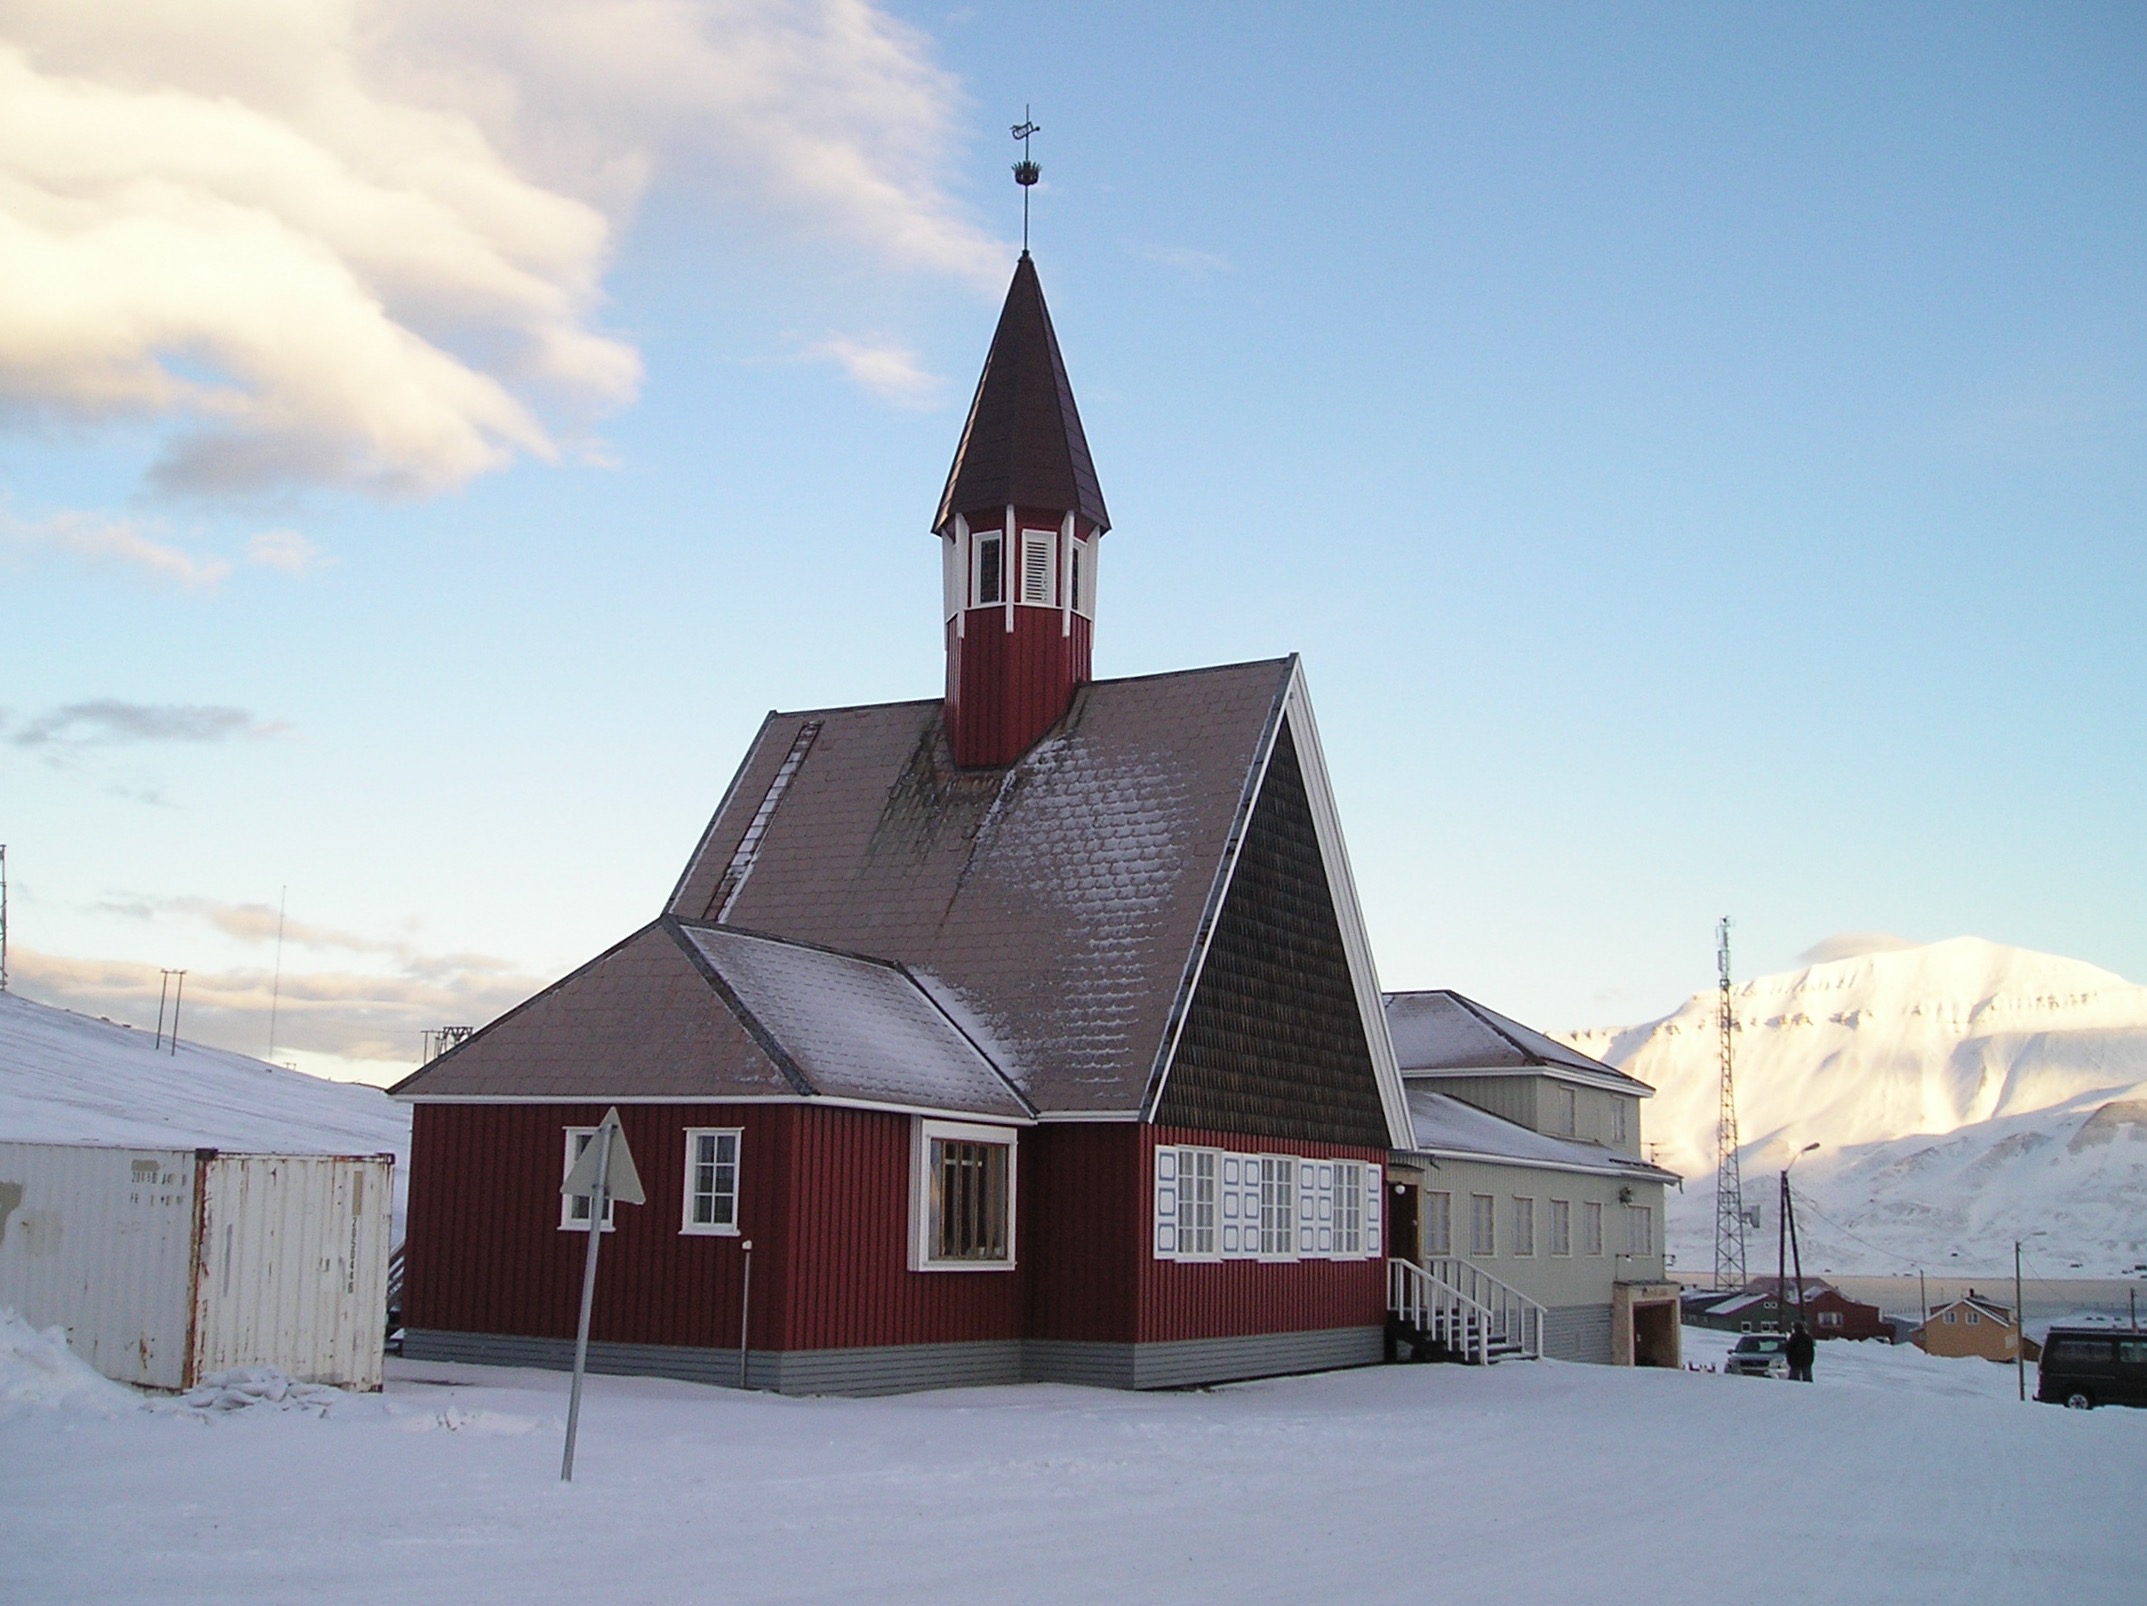 The World’s Northernmost Church